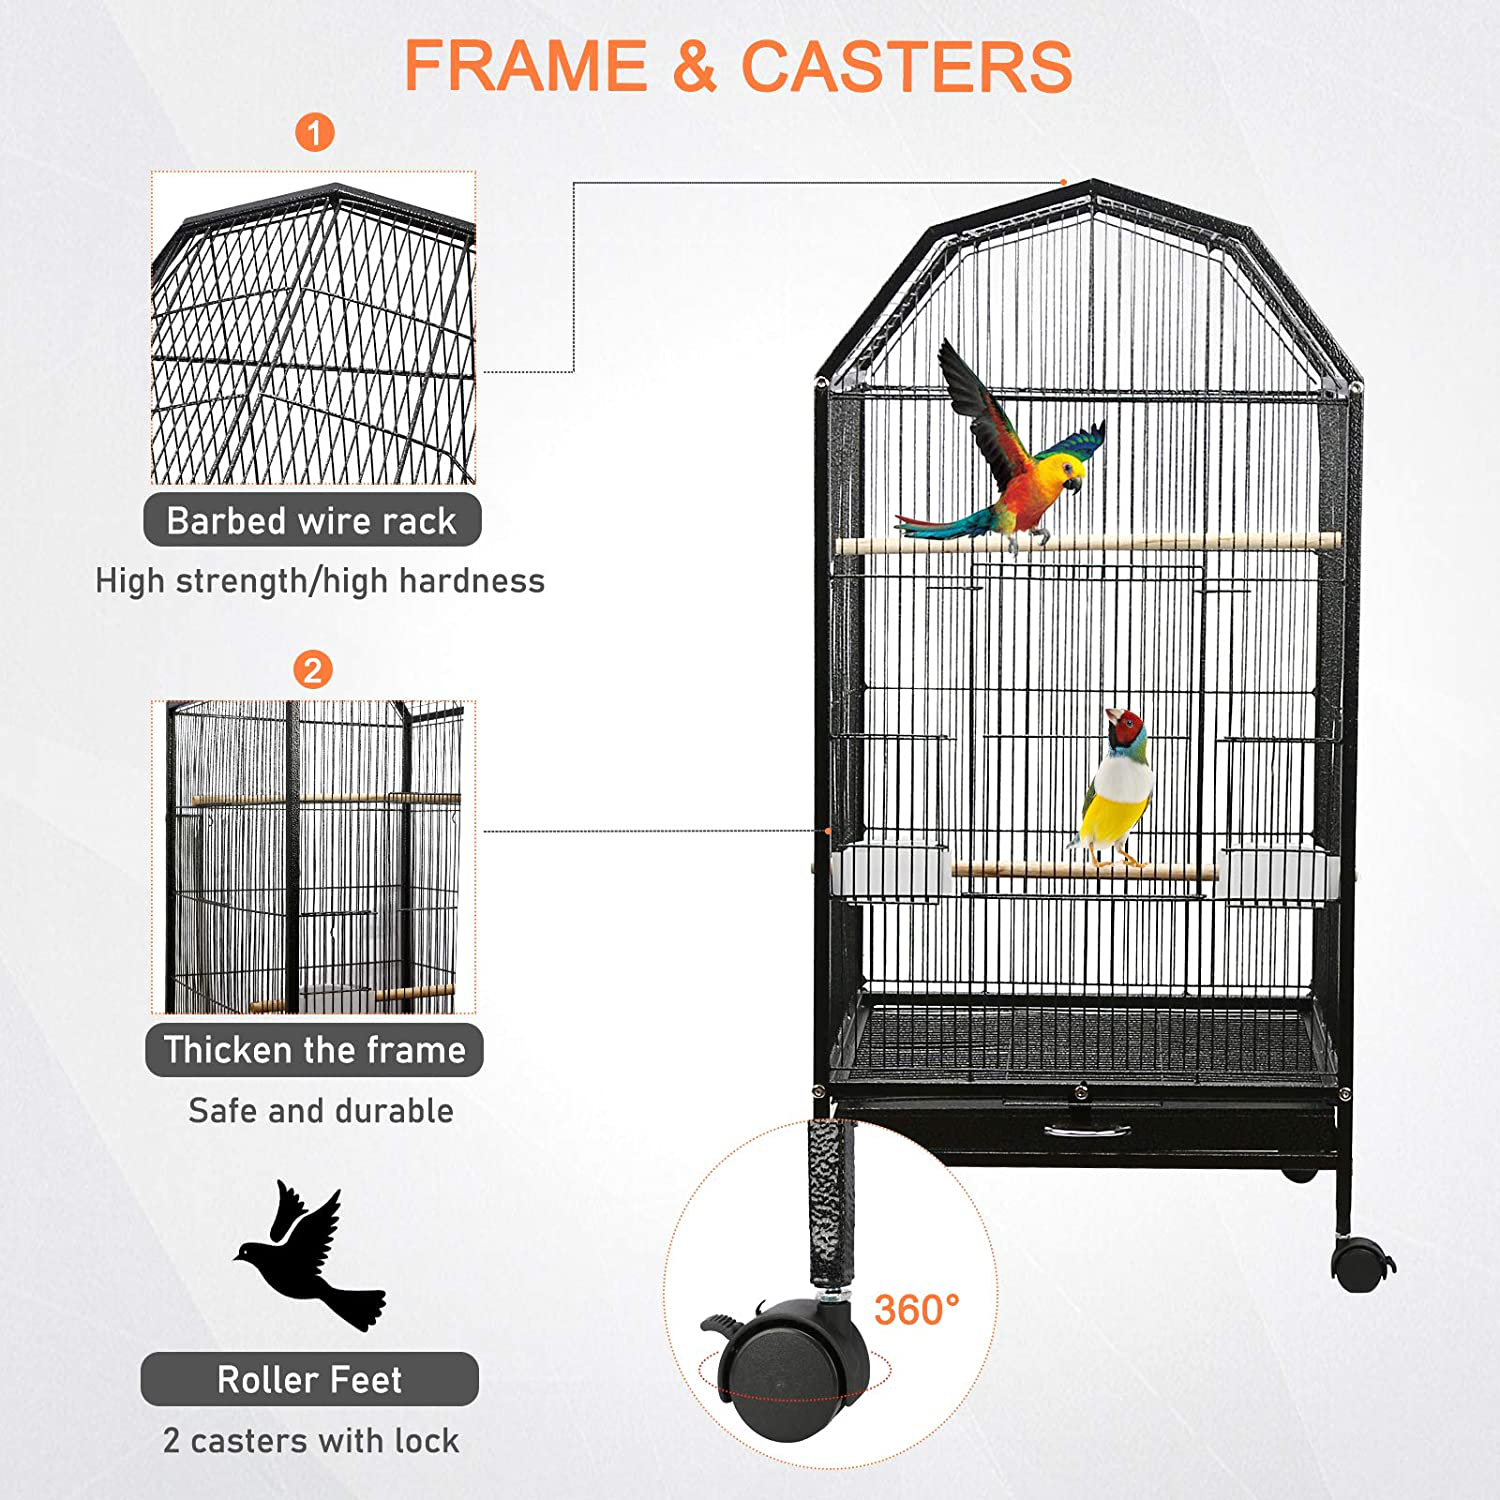 Ibnotuiy Parakeet Bird Cage with Rolling Stand Metal Pet Bird Flight Cages Large for Conure Canary Parekette Macaw Finch Cockatoo Budgie Cockatiels Parrot,Perches Catch Tray Included,Black Animals & Pet Supplies > Pet Supplies > Bird Supplies > Bird Cage Accessories Ibnotuiy   